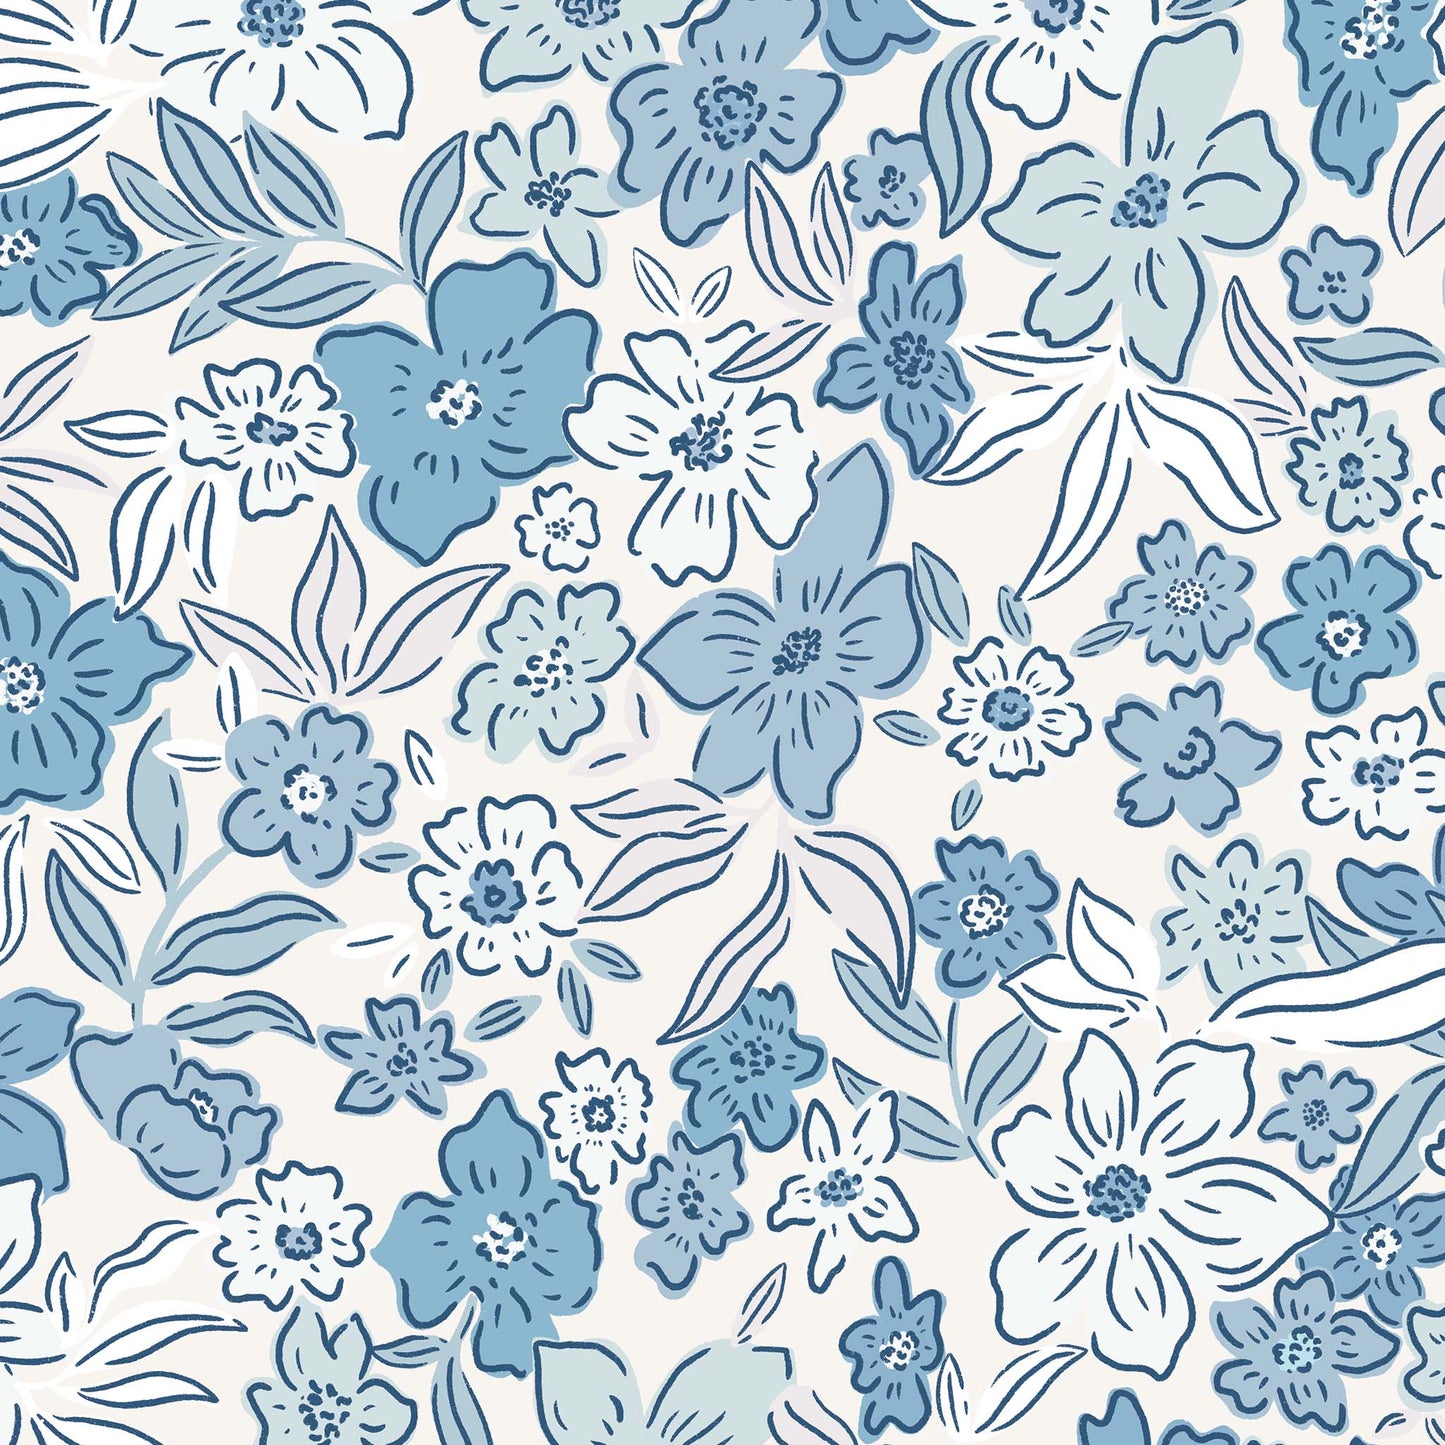 Introducing our Sweet Meadow Wallpaper in Sunshine Yellow, featuring a charming array of vibrant botanicals and scattered flowers in a calming blue hue shown zoomed in.